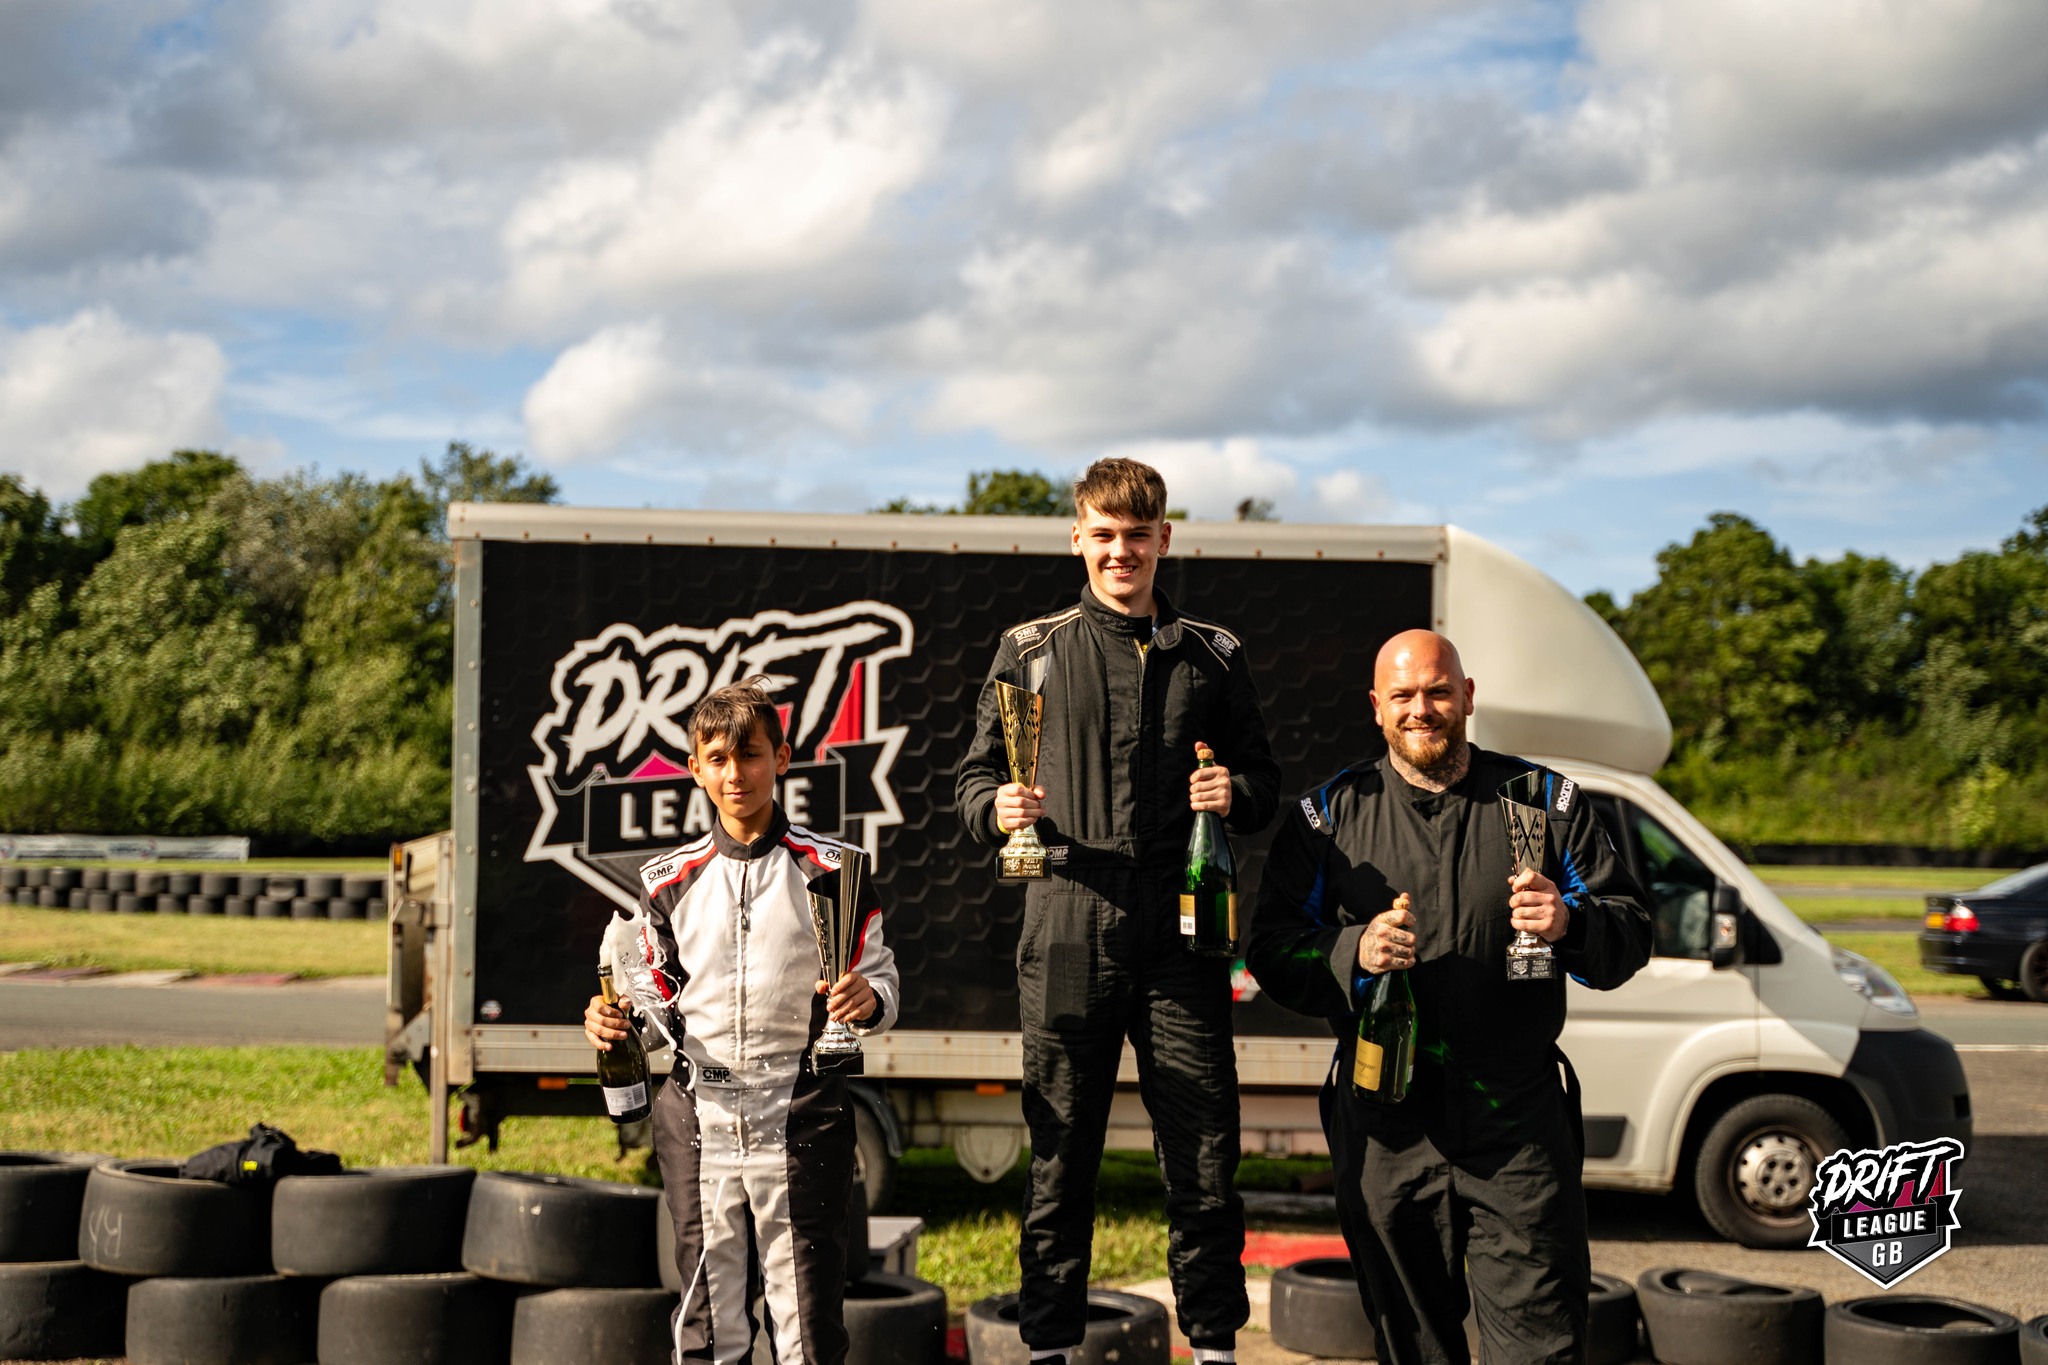 Teeside Round 4 Class 2 podiums went to…